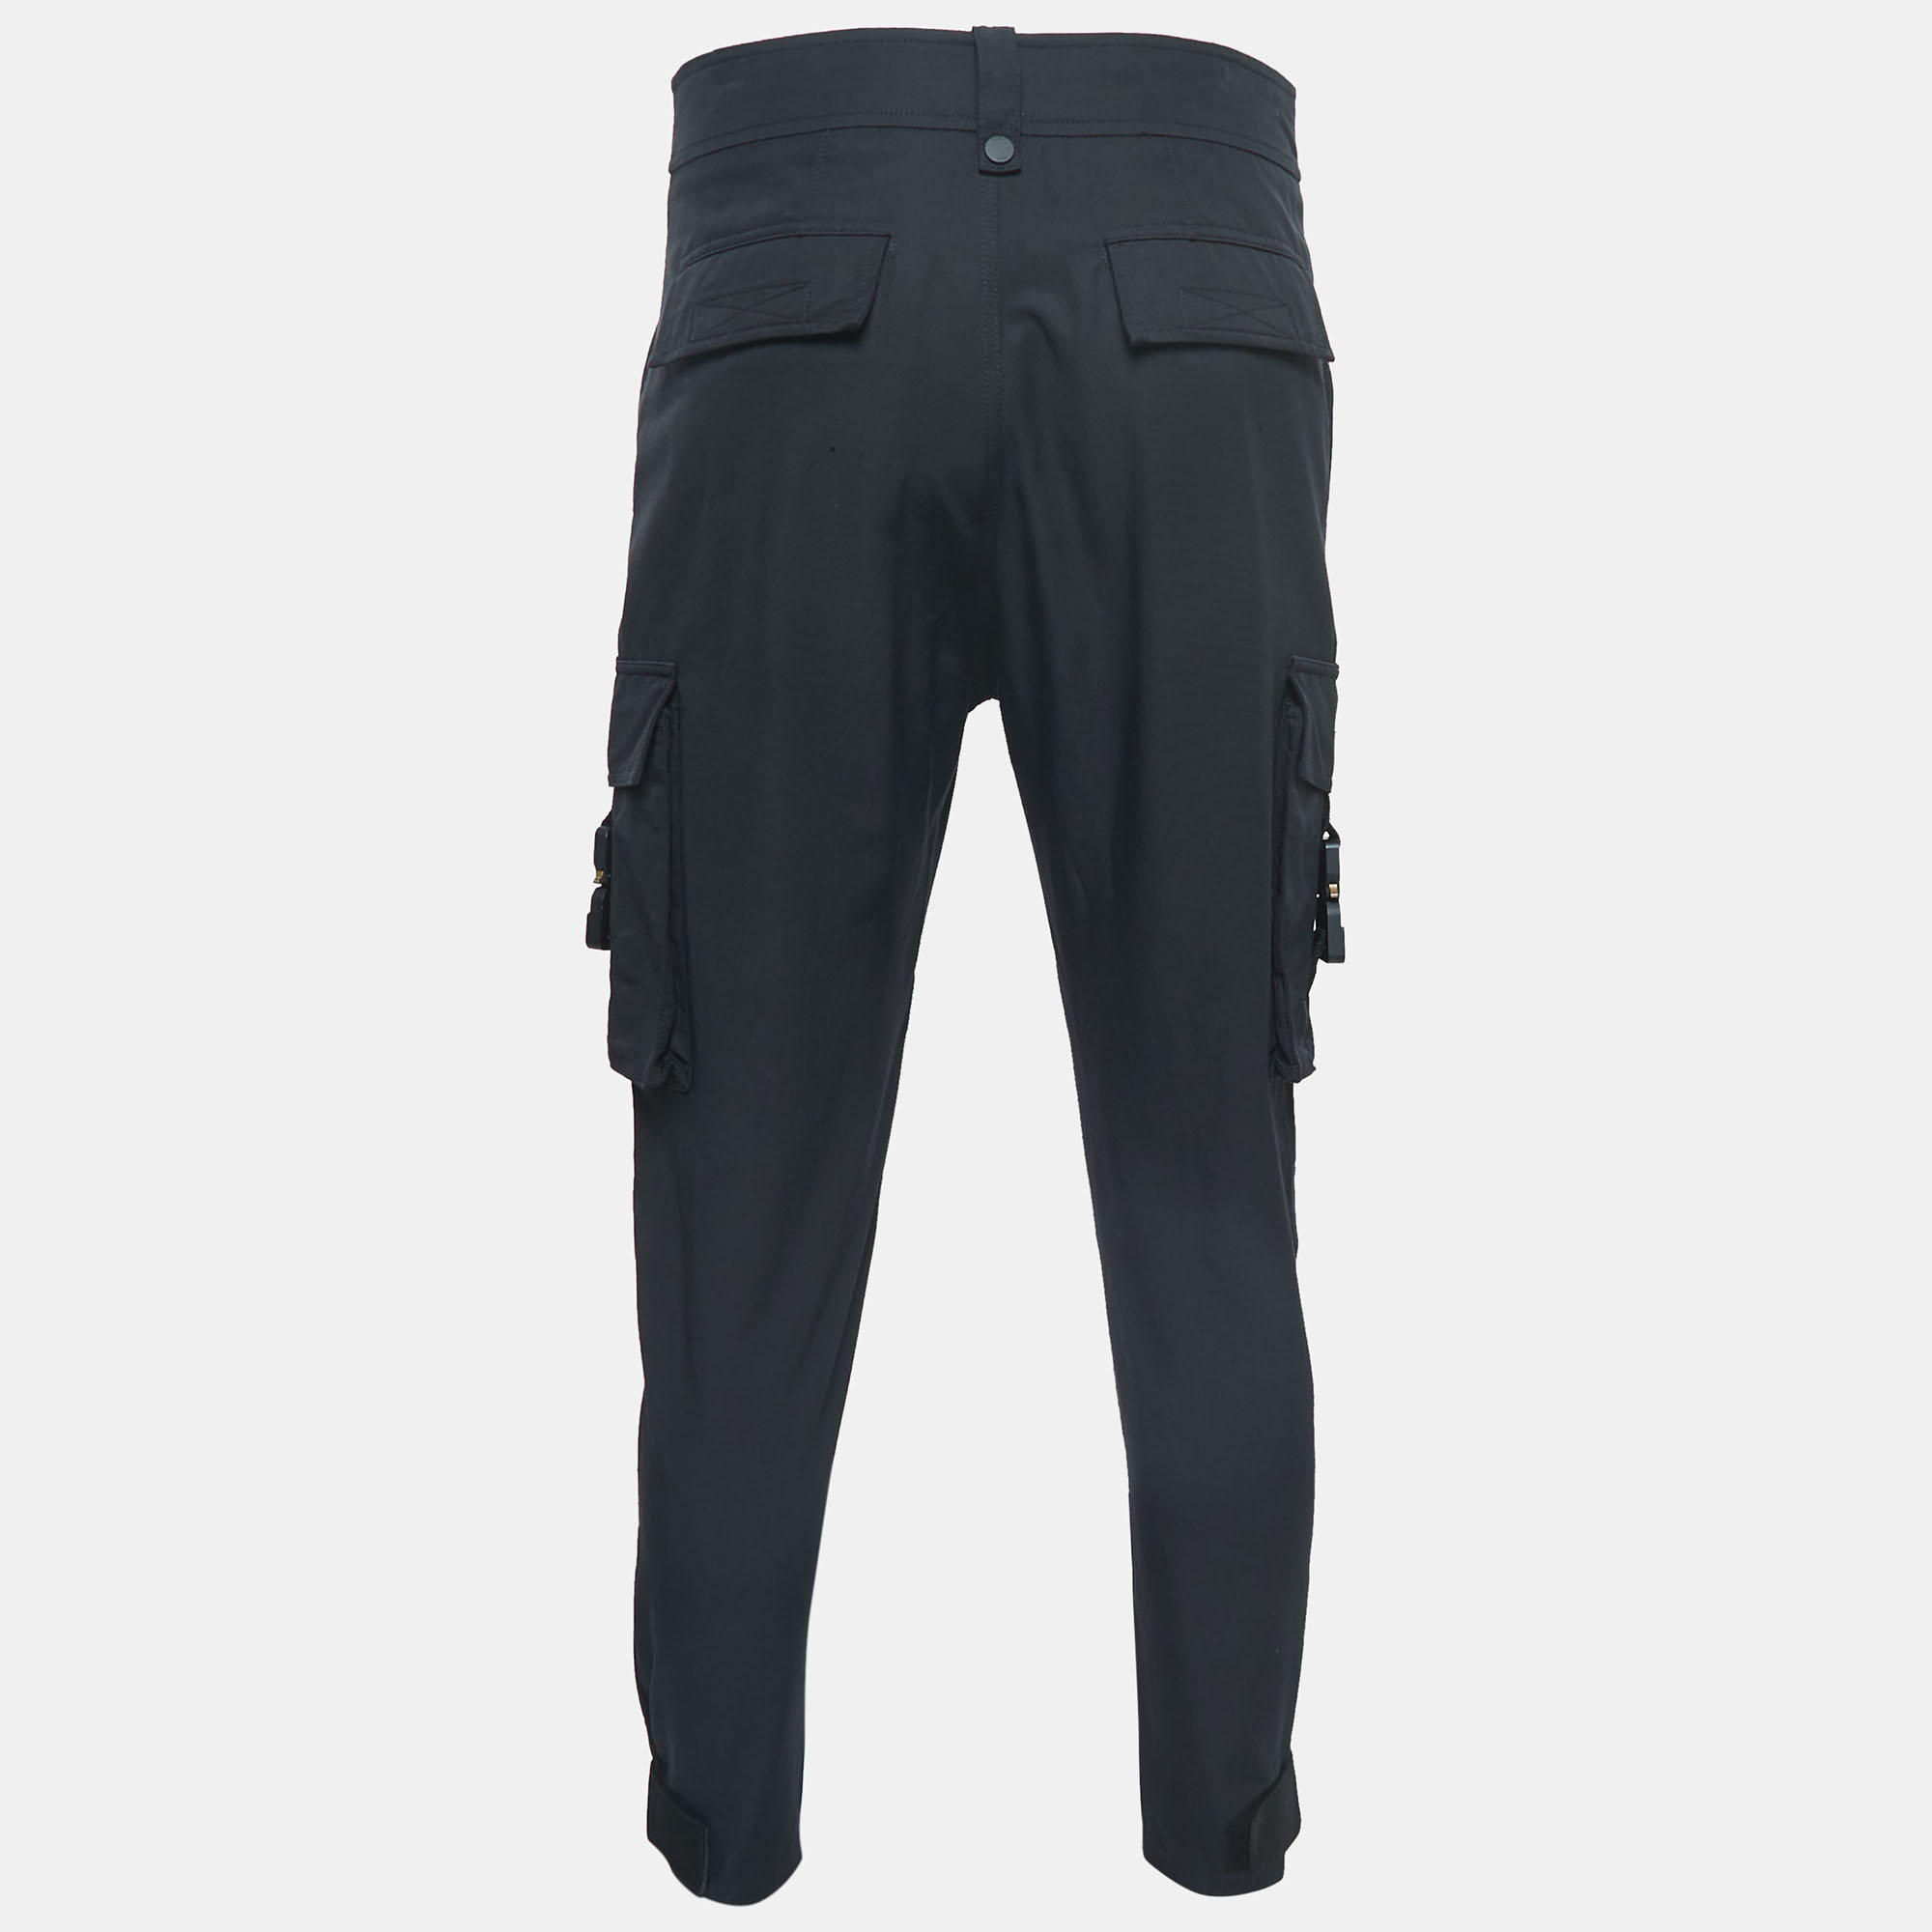   The Luxury Closet Dior Homme Black Technical Cotton Tactical CD Buckled Cargo Pants S